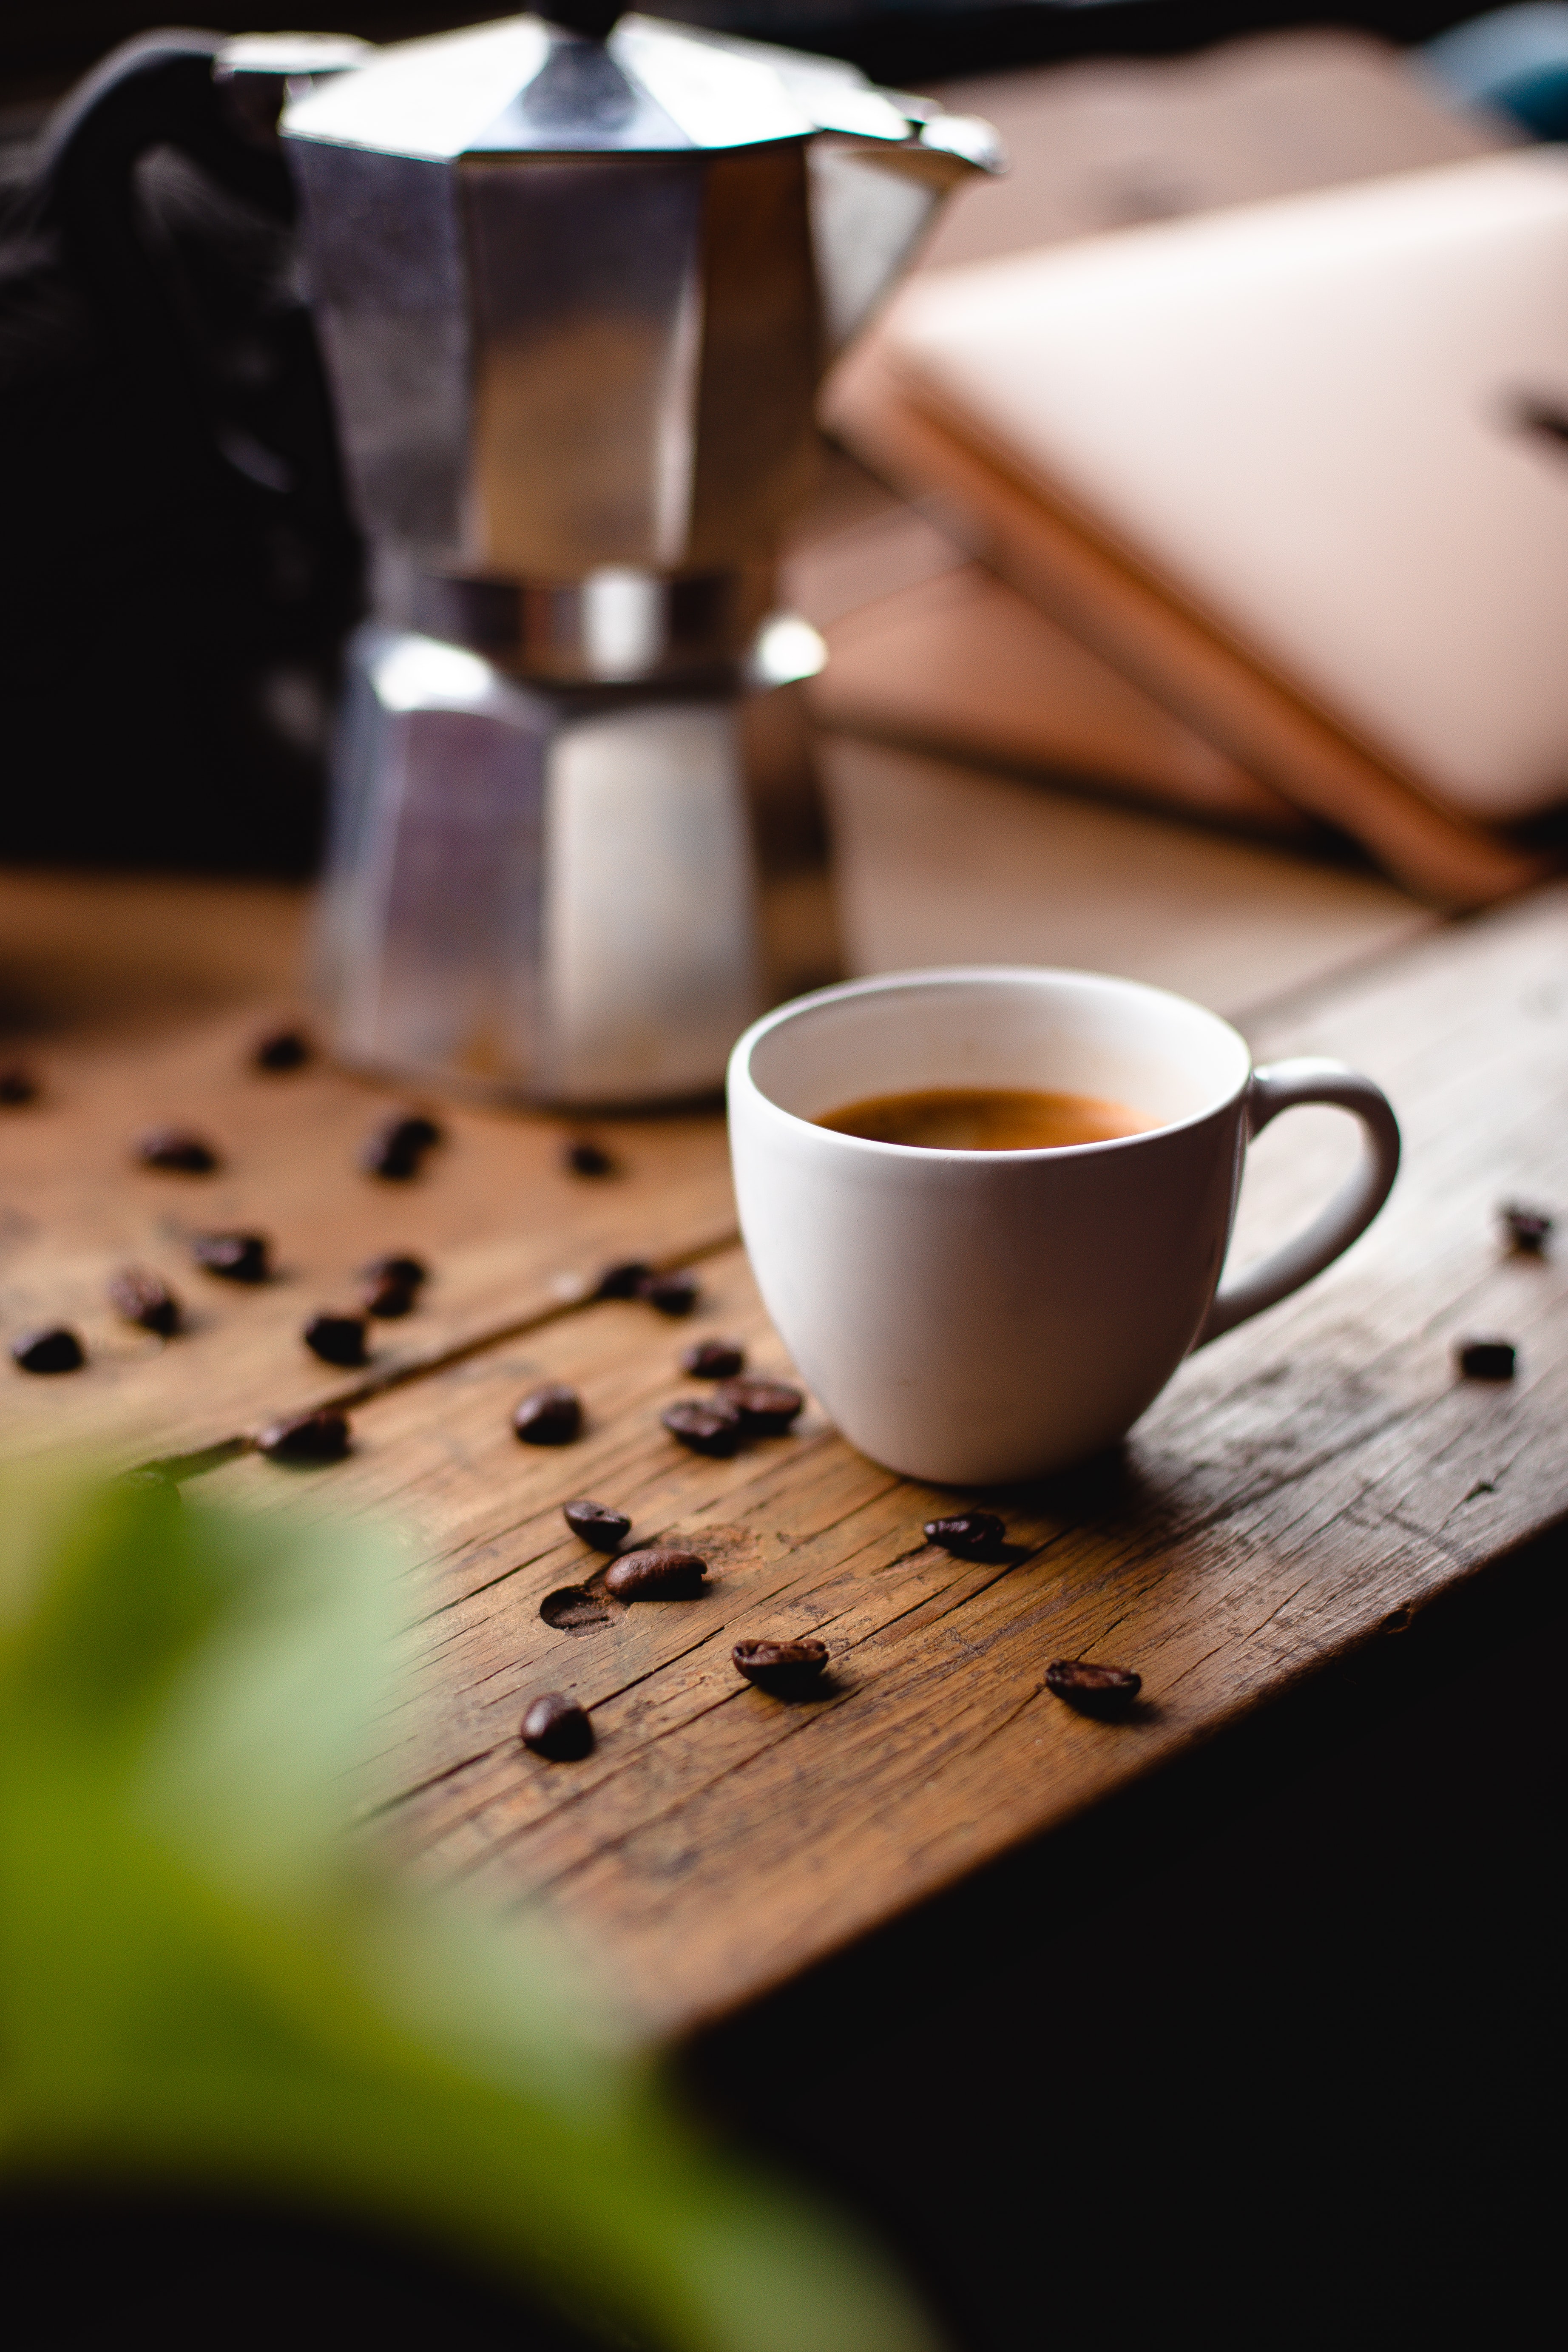 cup, coffee, teapot, food, table, kettle, coffee beans iphone wallpaper